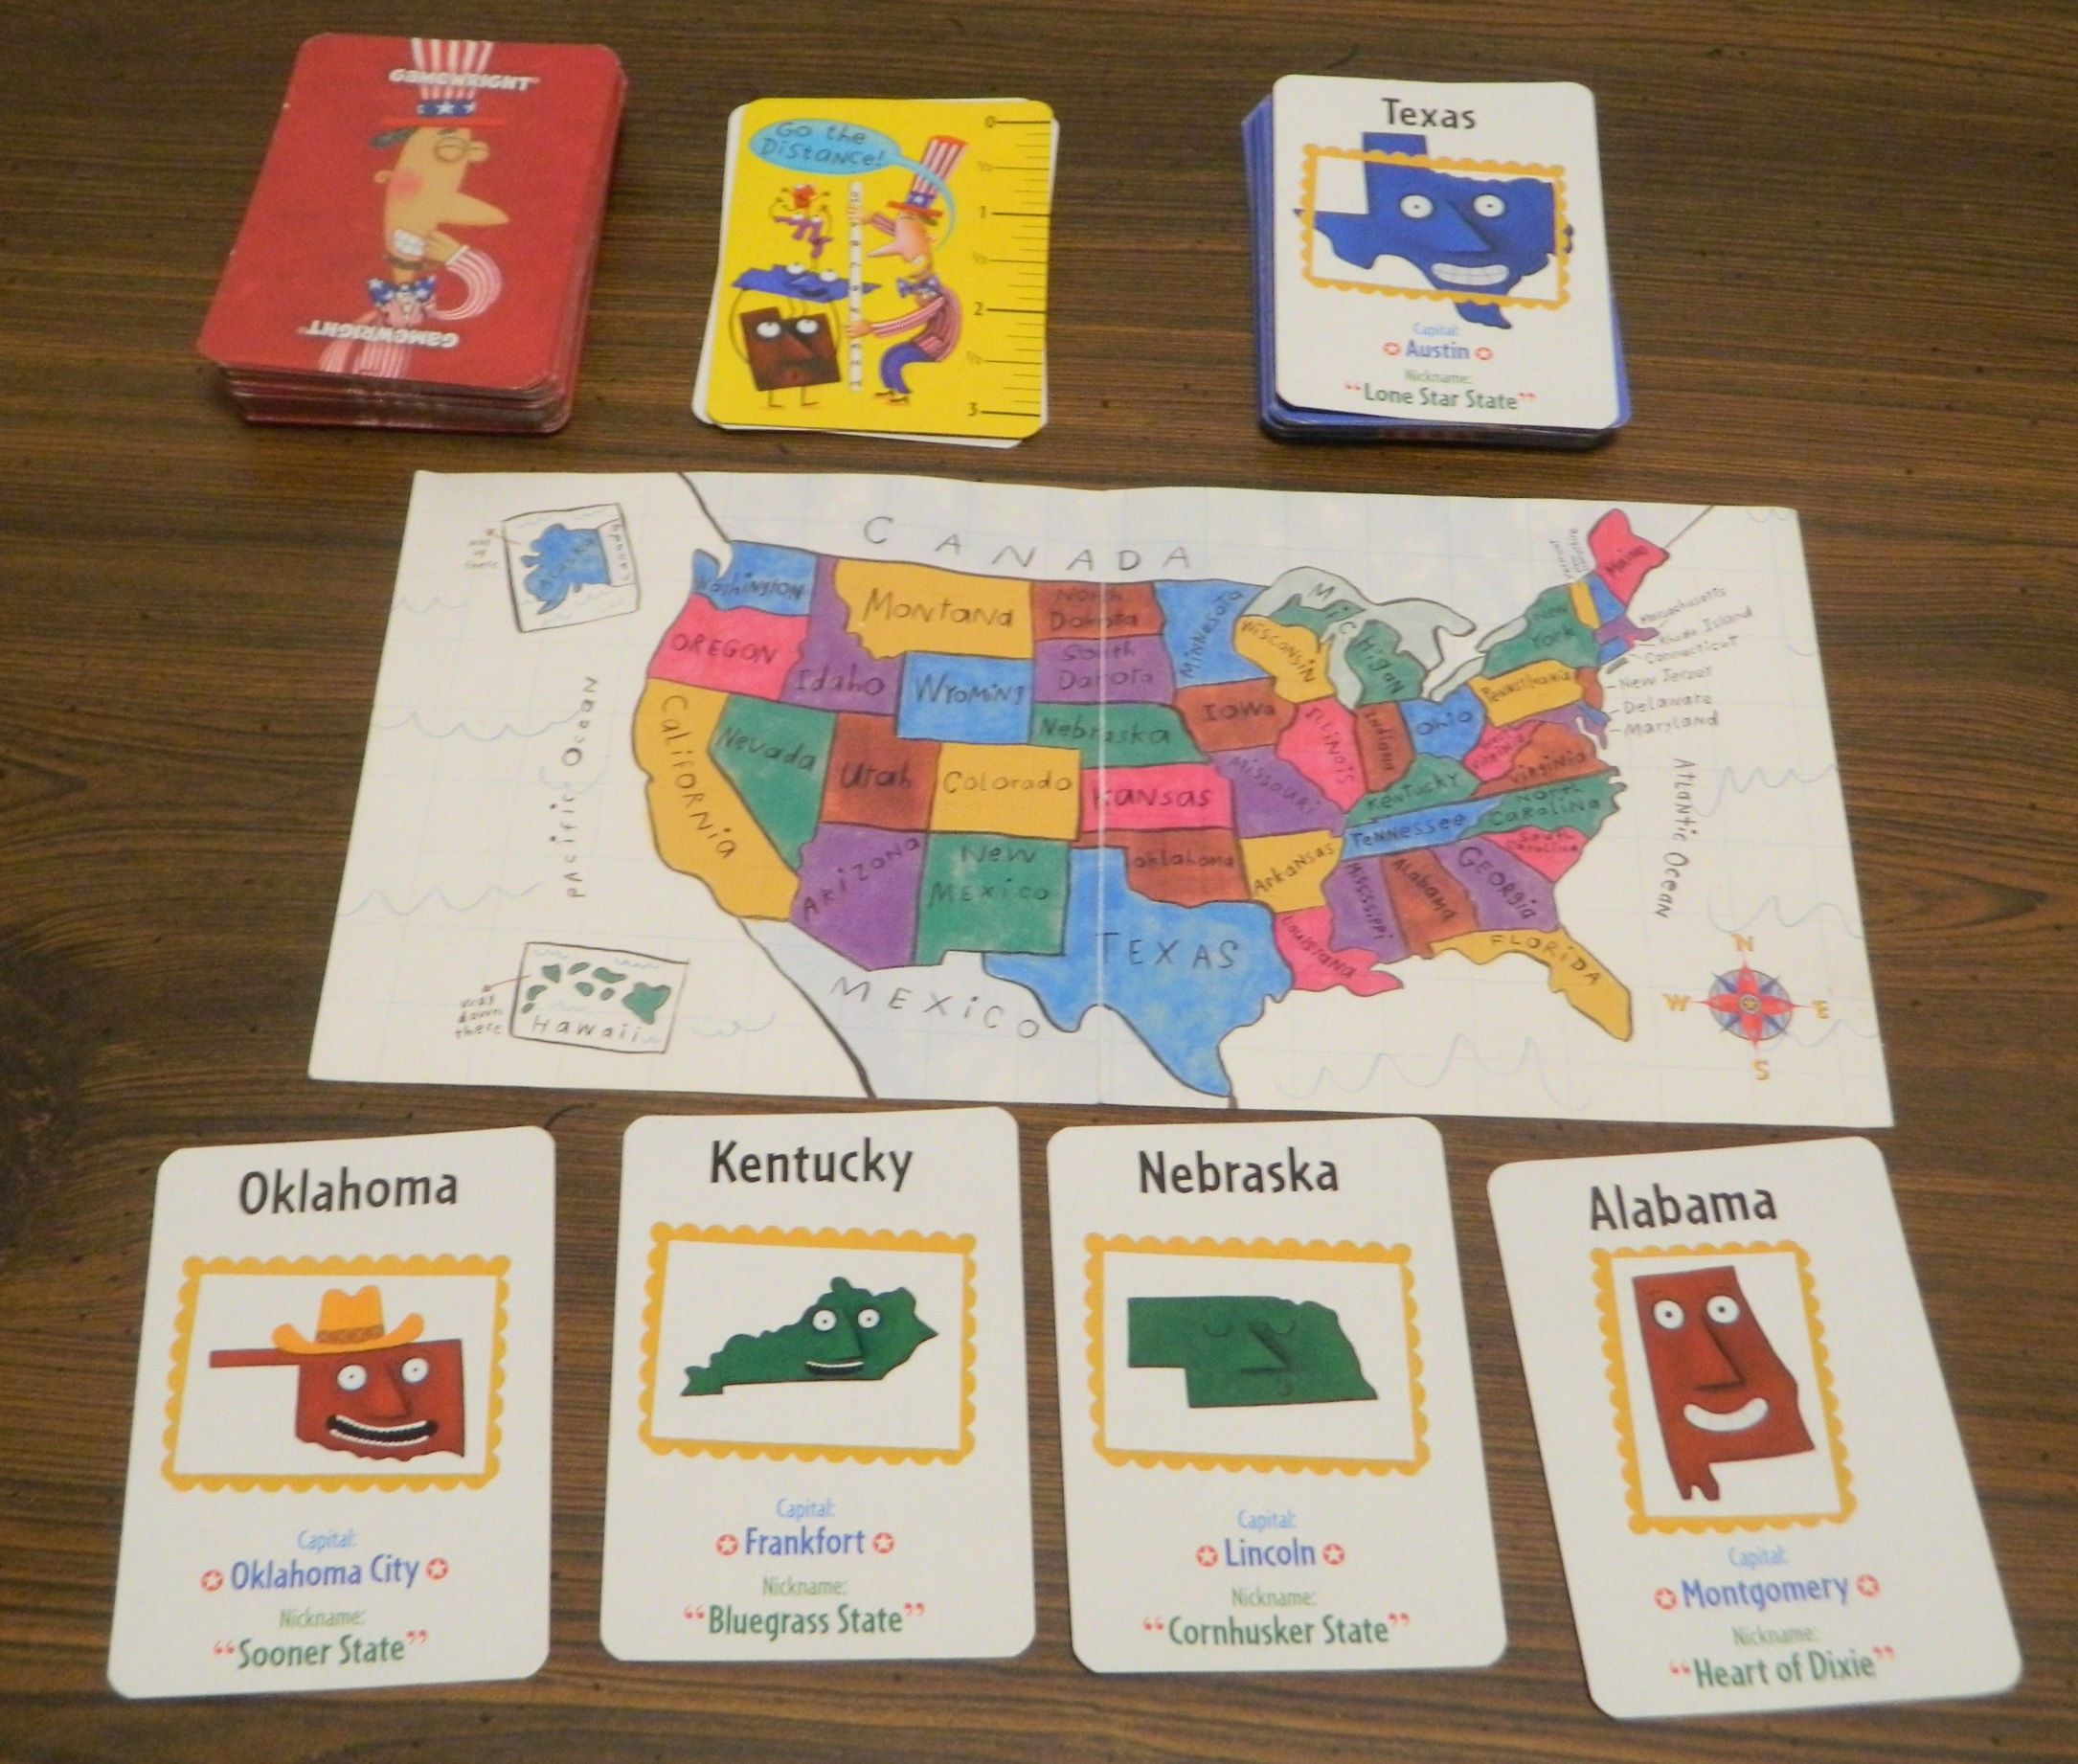 Scrambled States of America with FREE Deck of Playing Cards